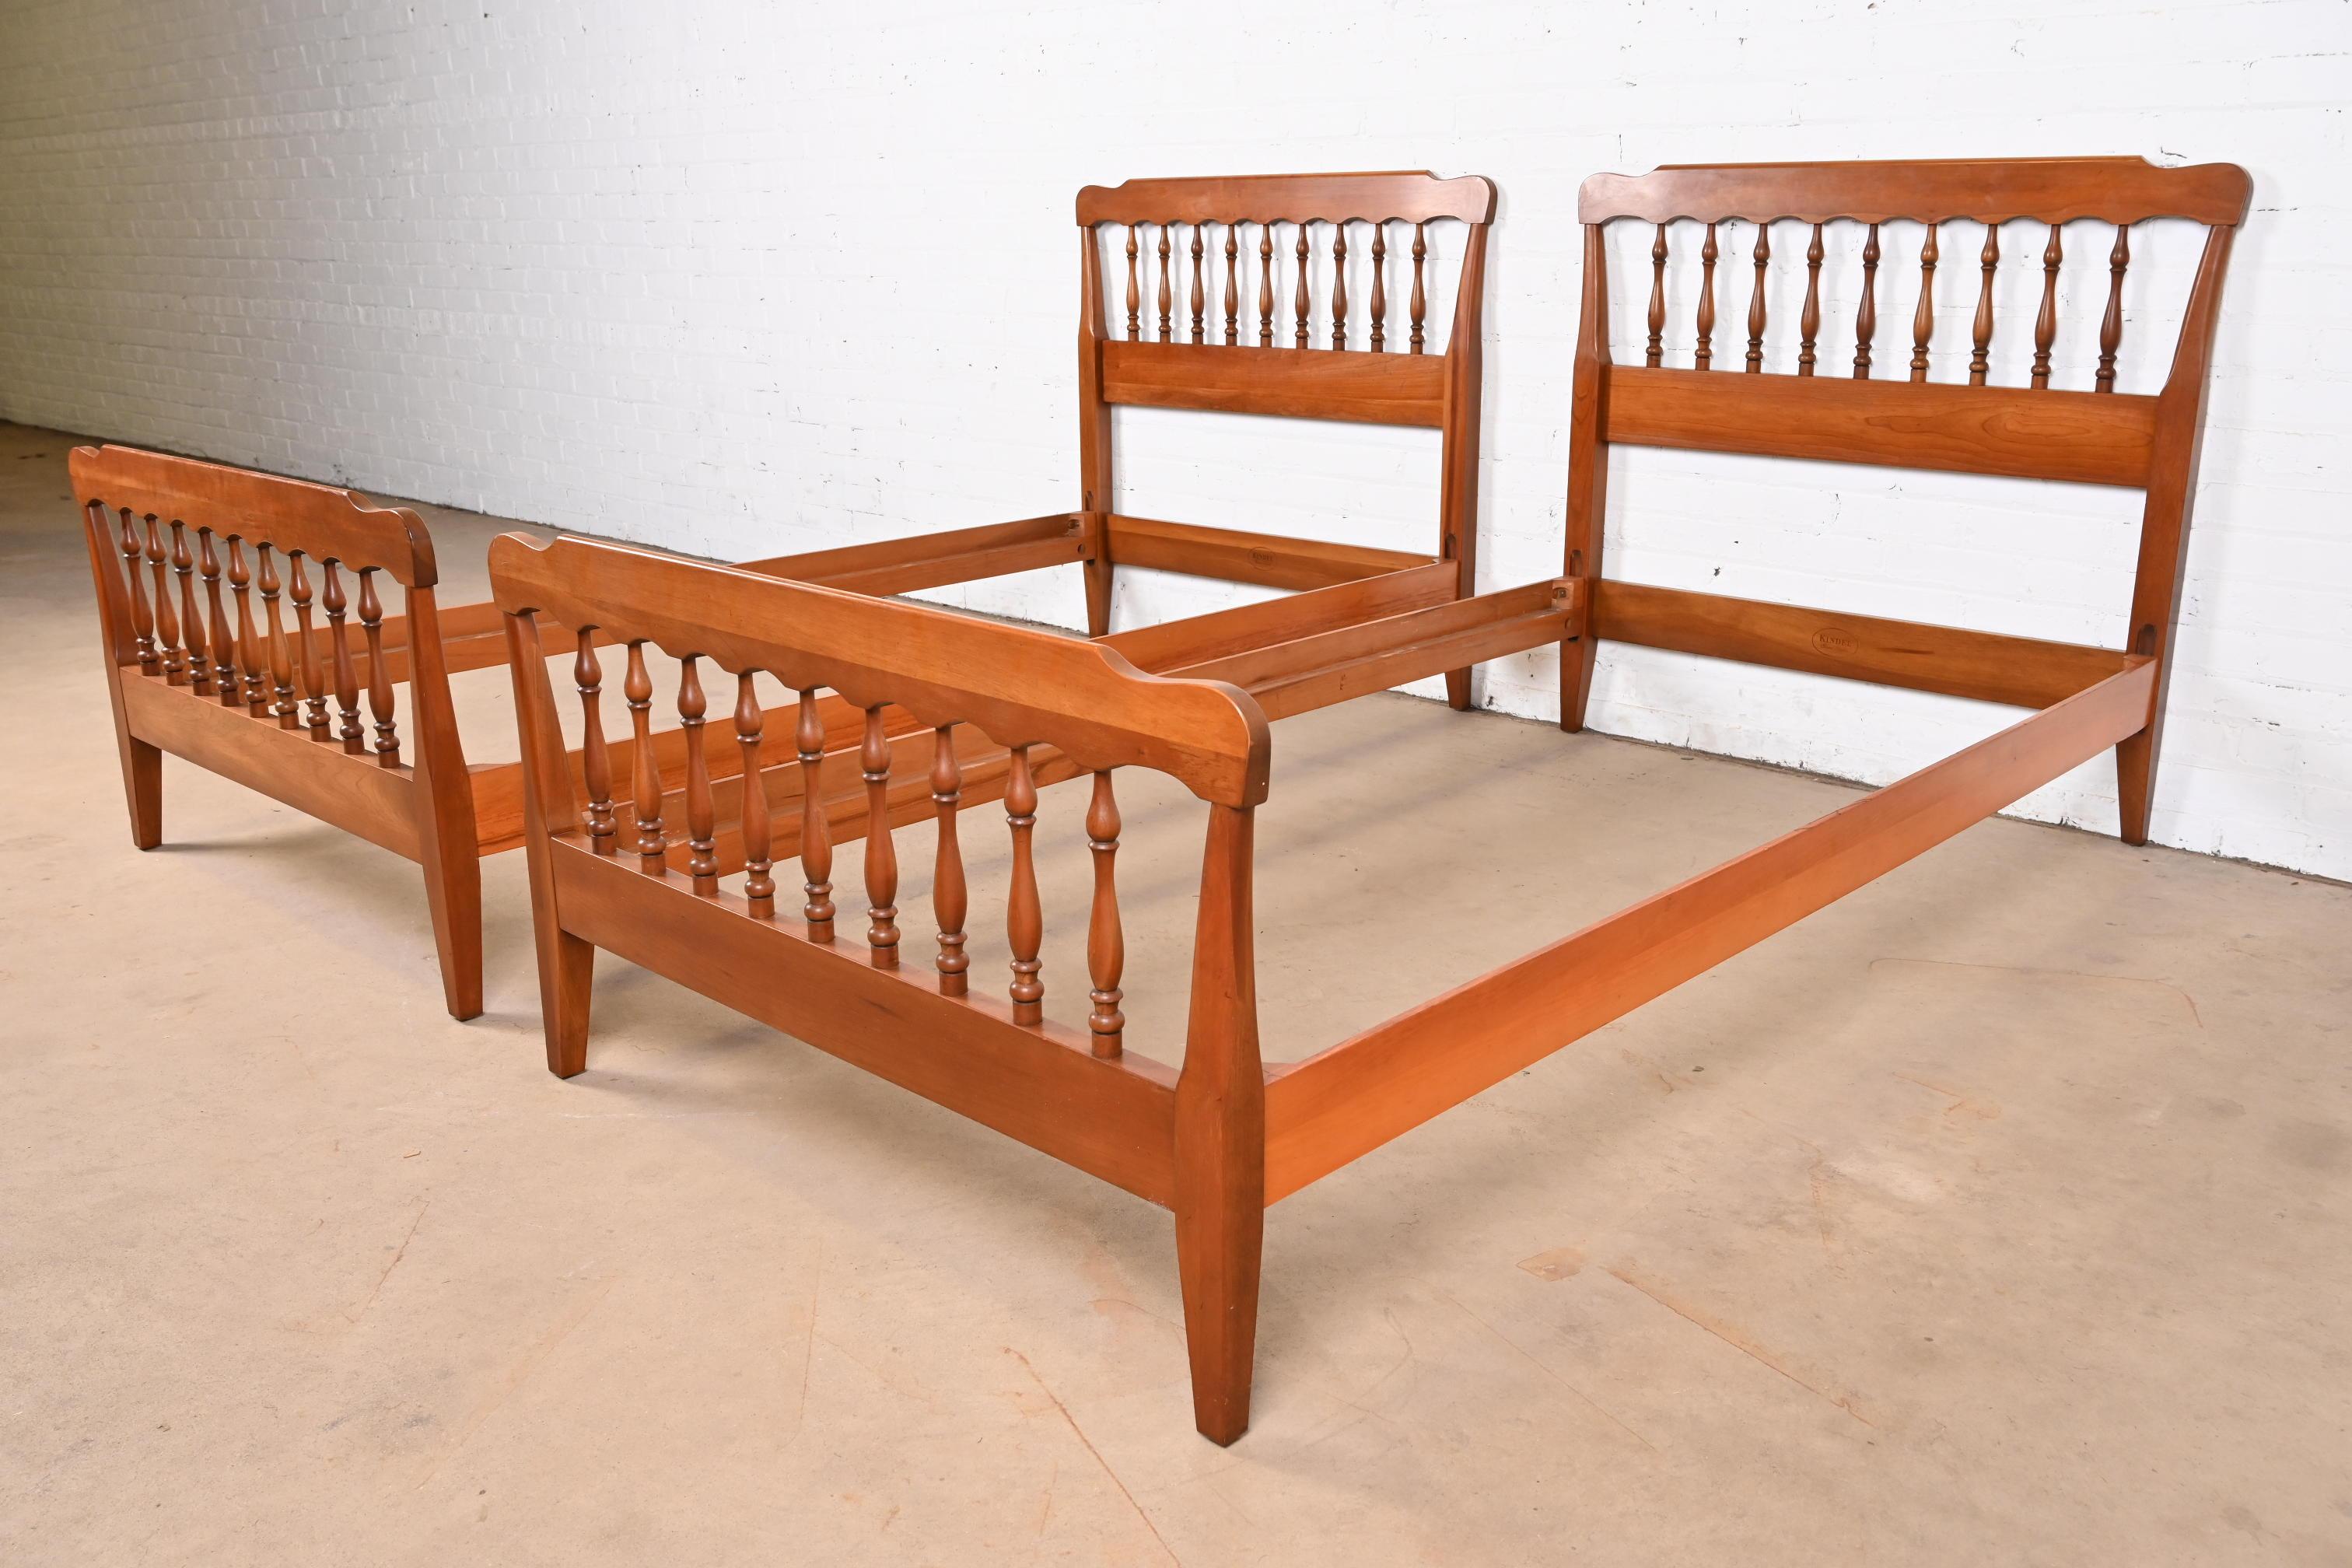 Kindel Furniture American Colonial Carved Cherry Wood Twin Size Spindle Beds For Sale 1